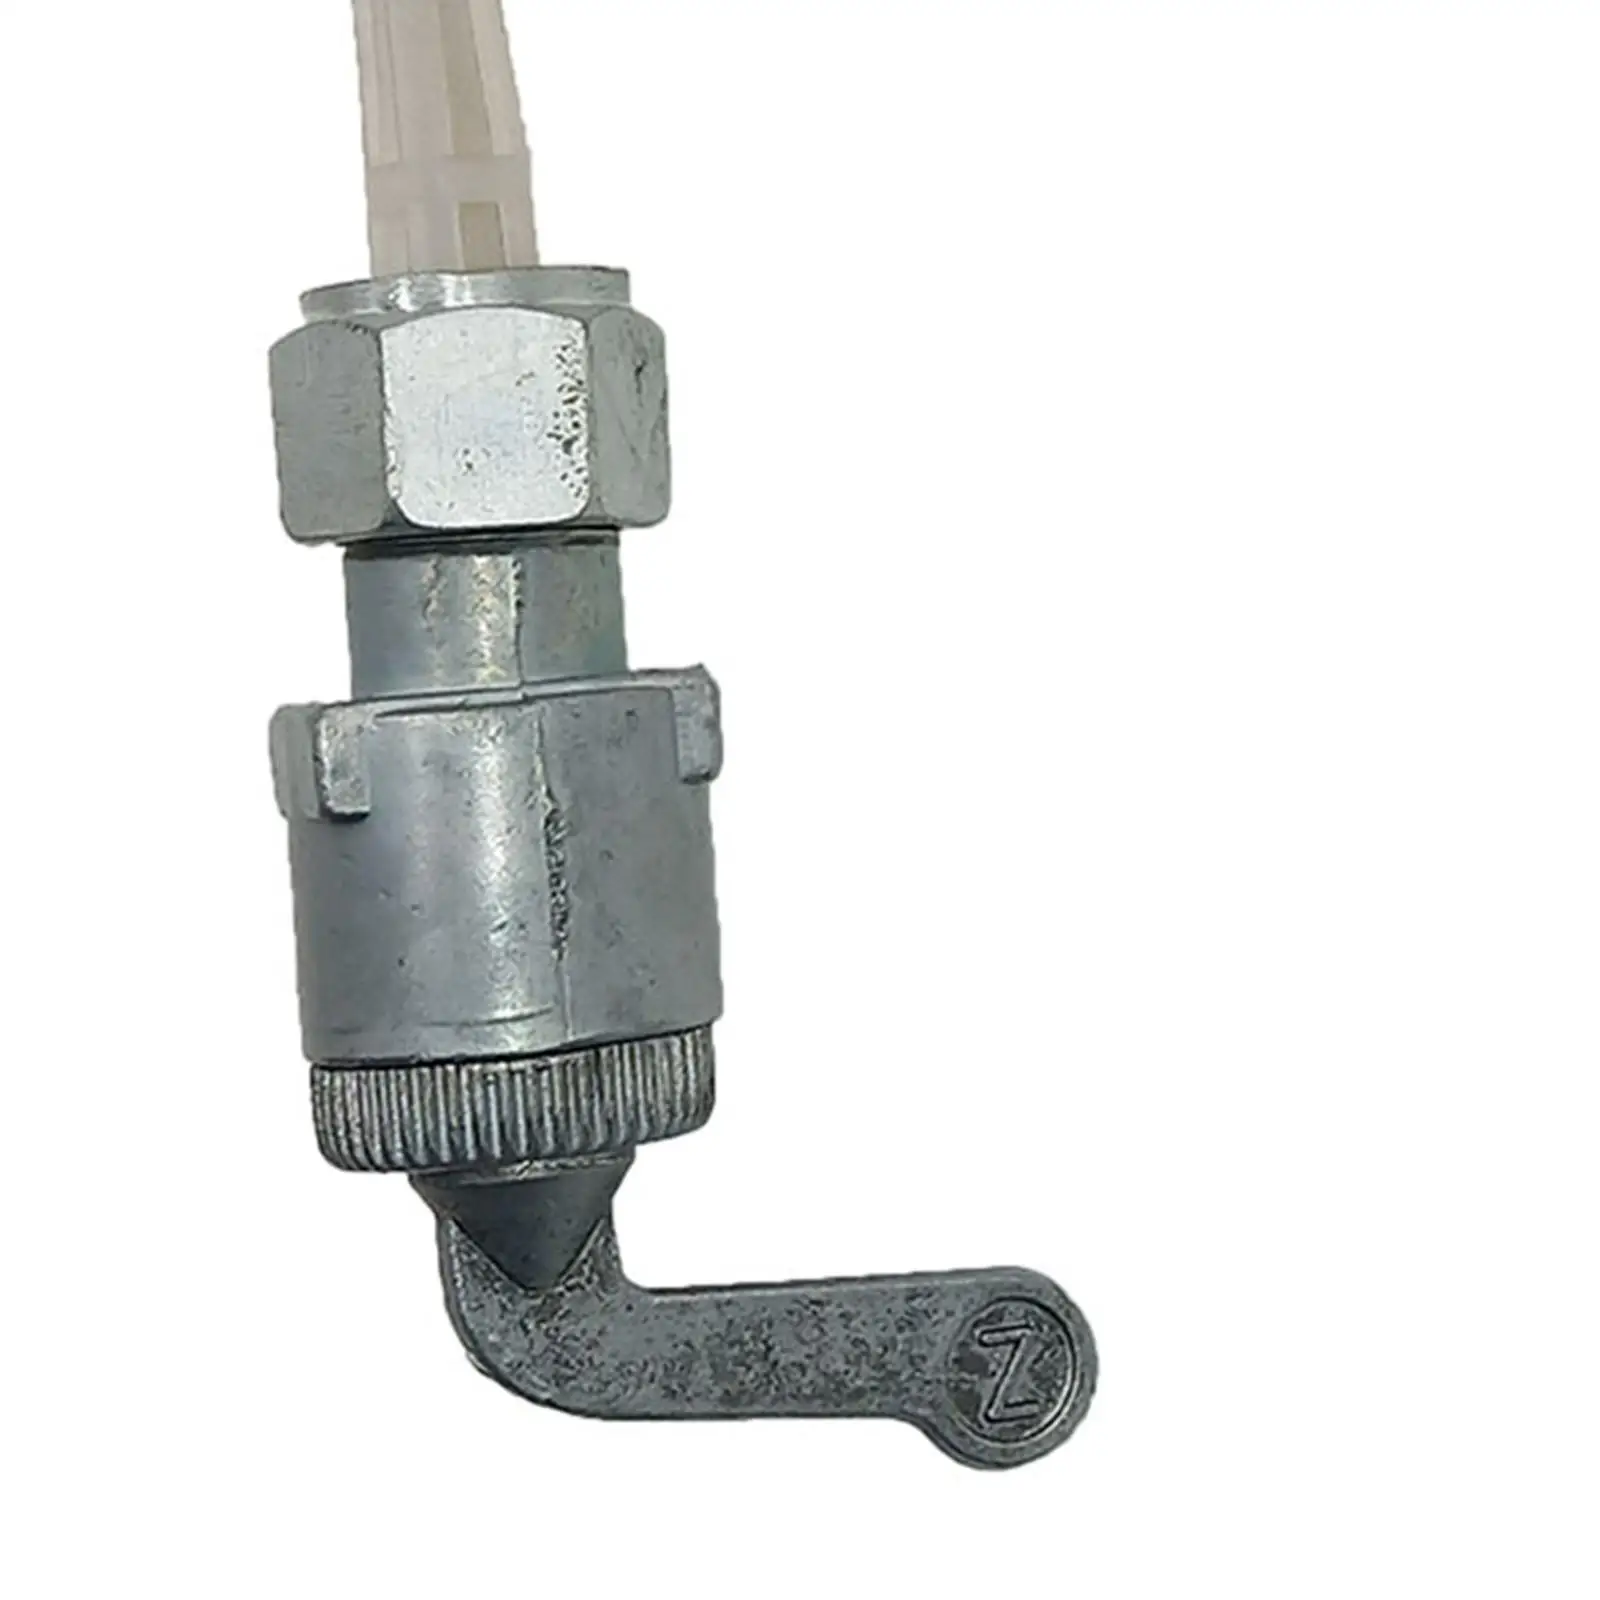 Fuel Petcock Gas Valve Tap switch to Use High Performance Premium Durable Replaces Accessories Copper 11mm Spare Parts